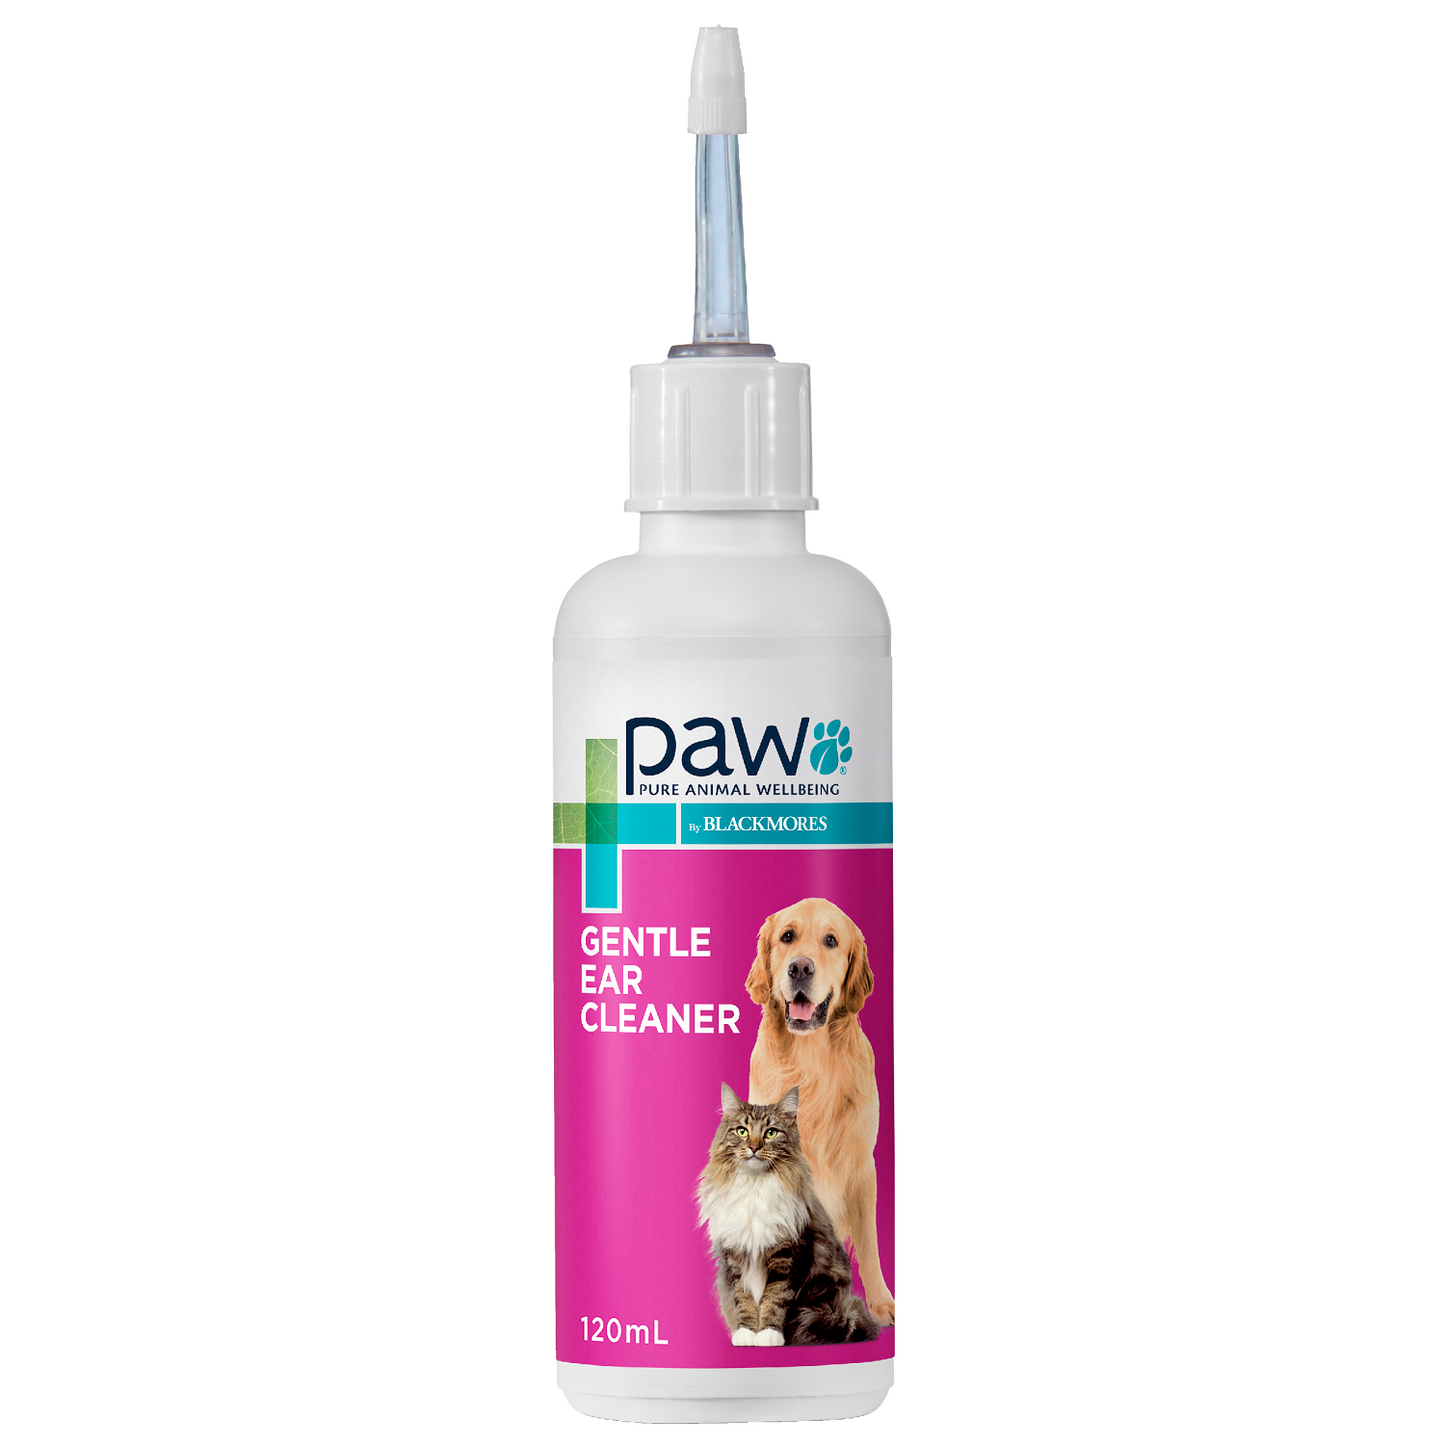 Blackmores: Paw – Gentle Ear Cleaner